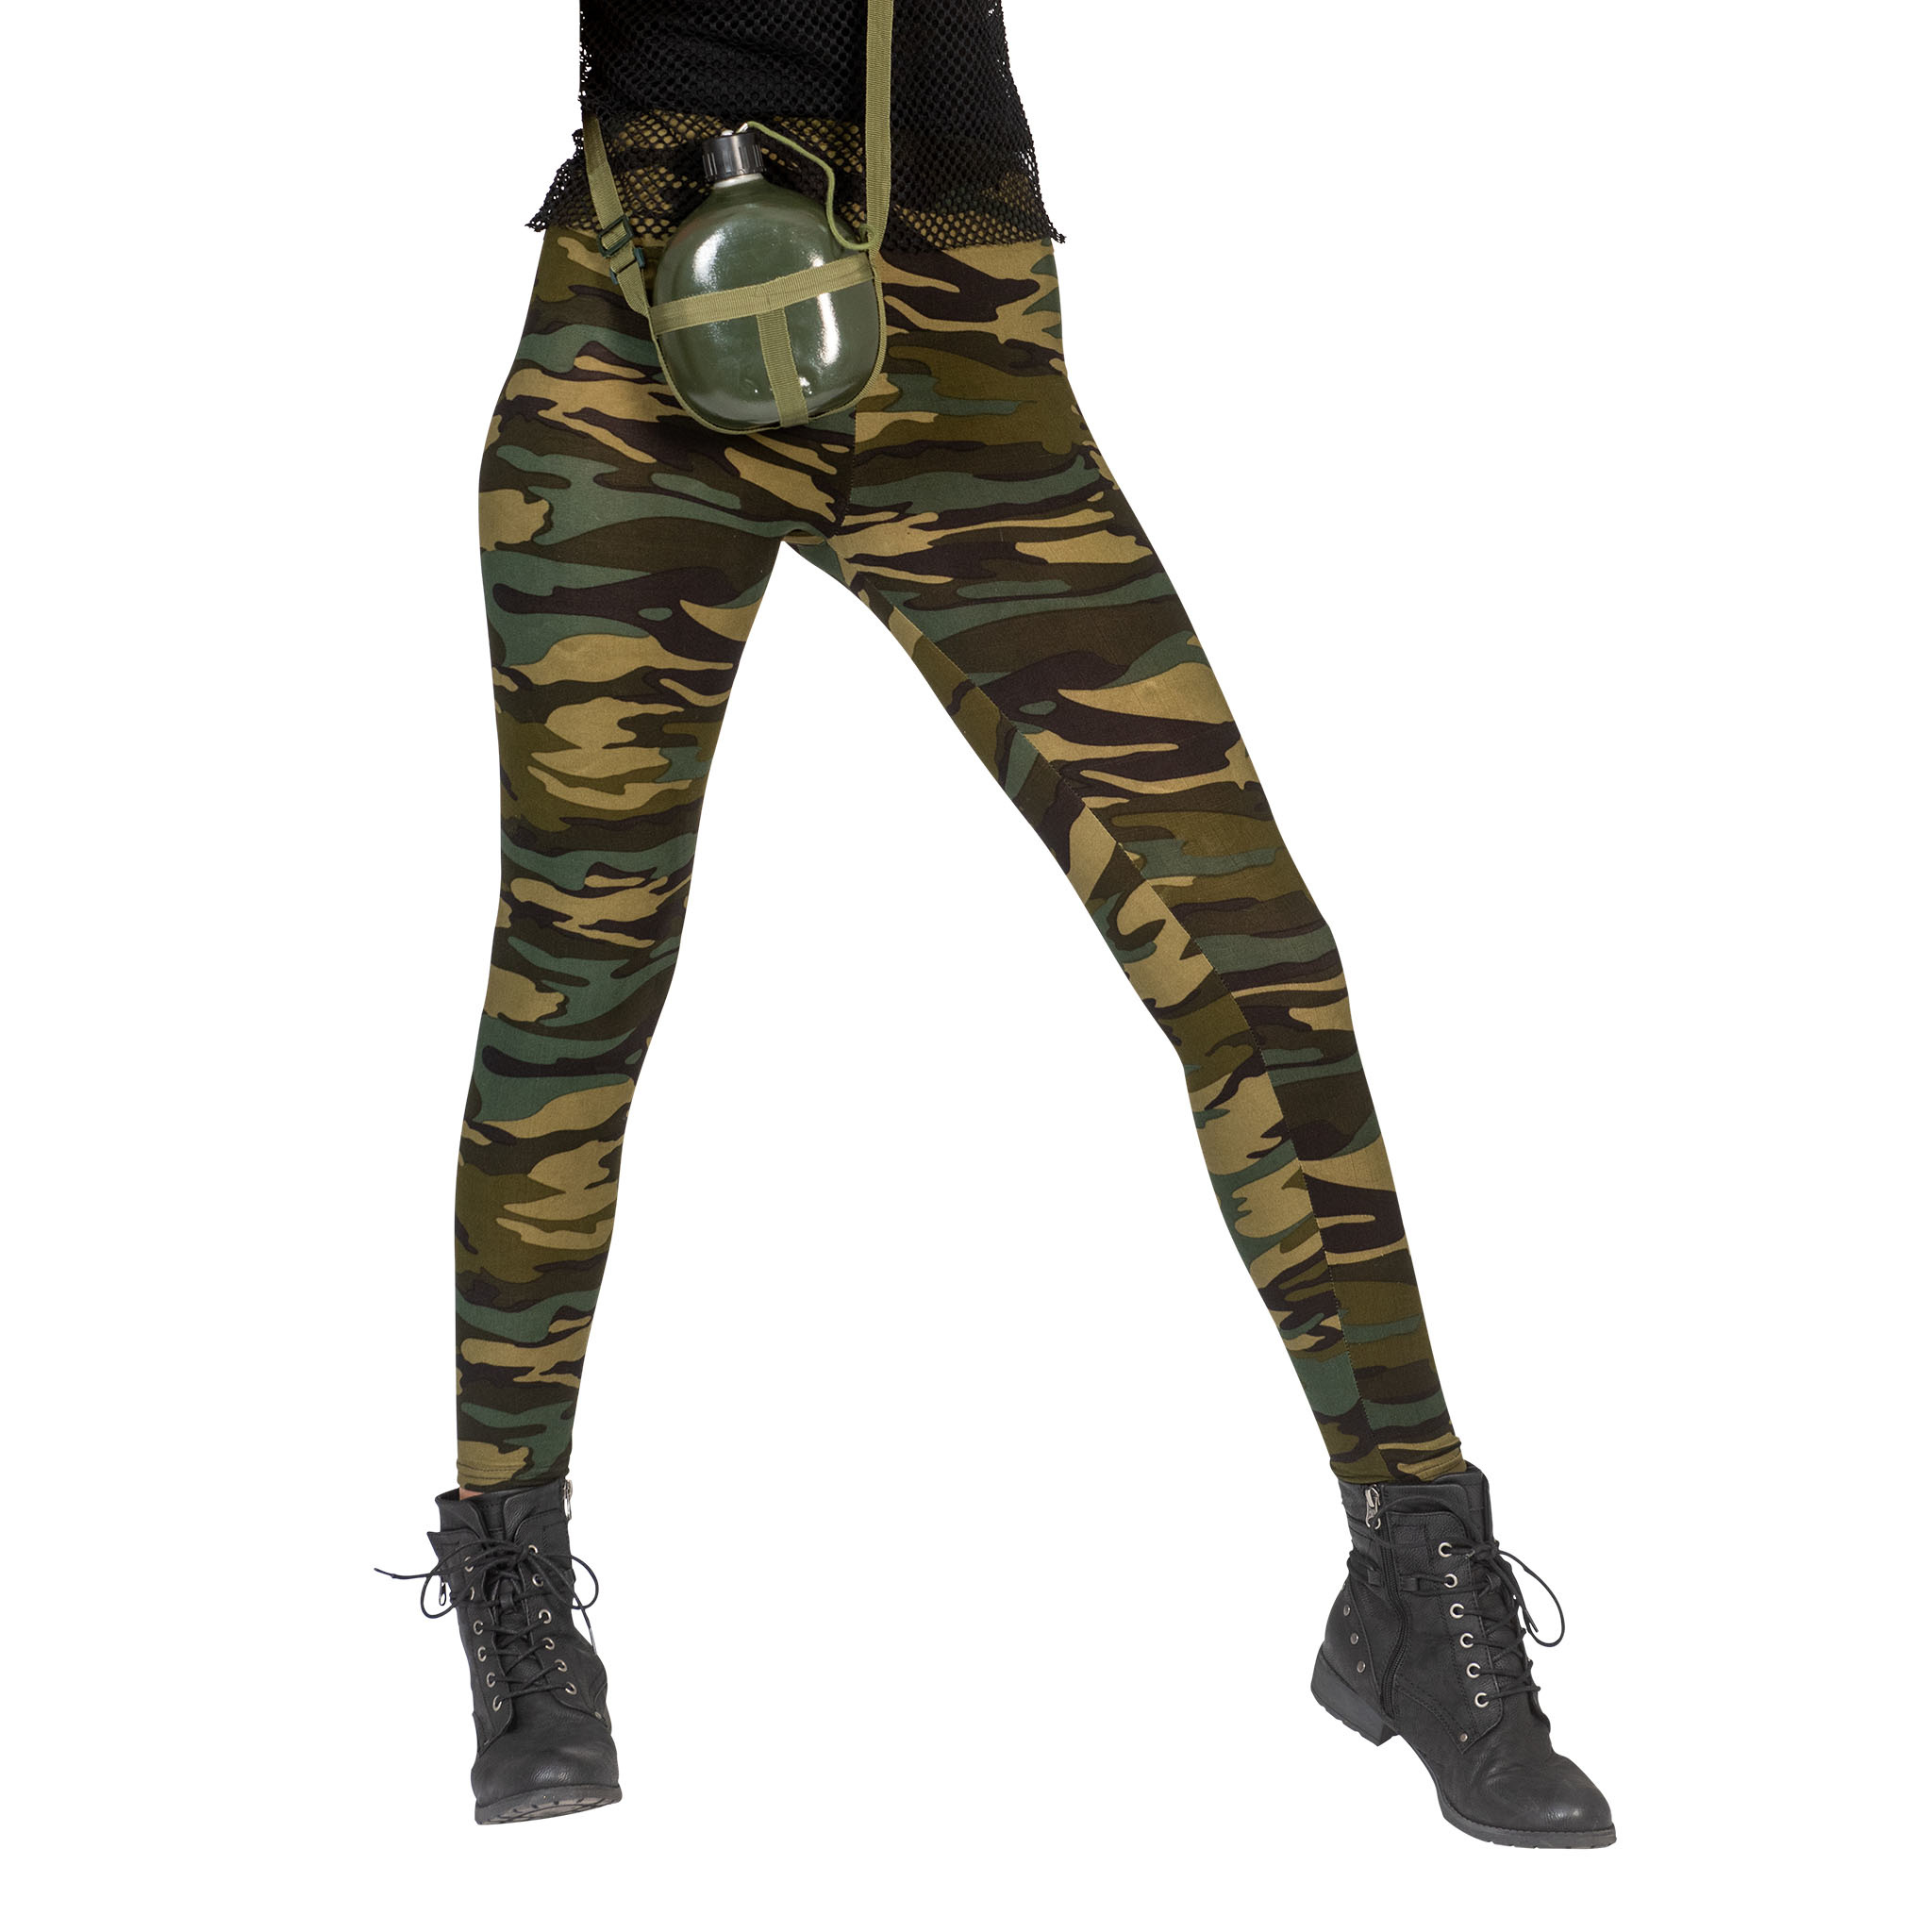 Army leggings - camouflage legging - one size (XS-M)